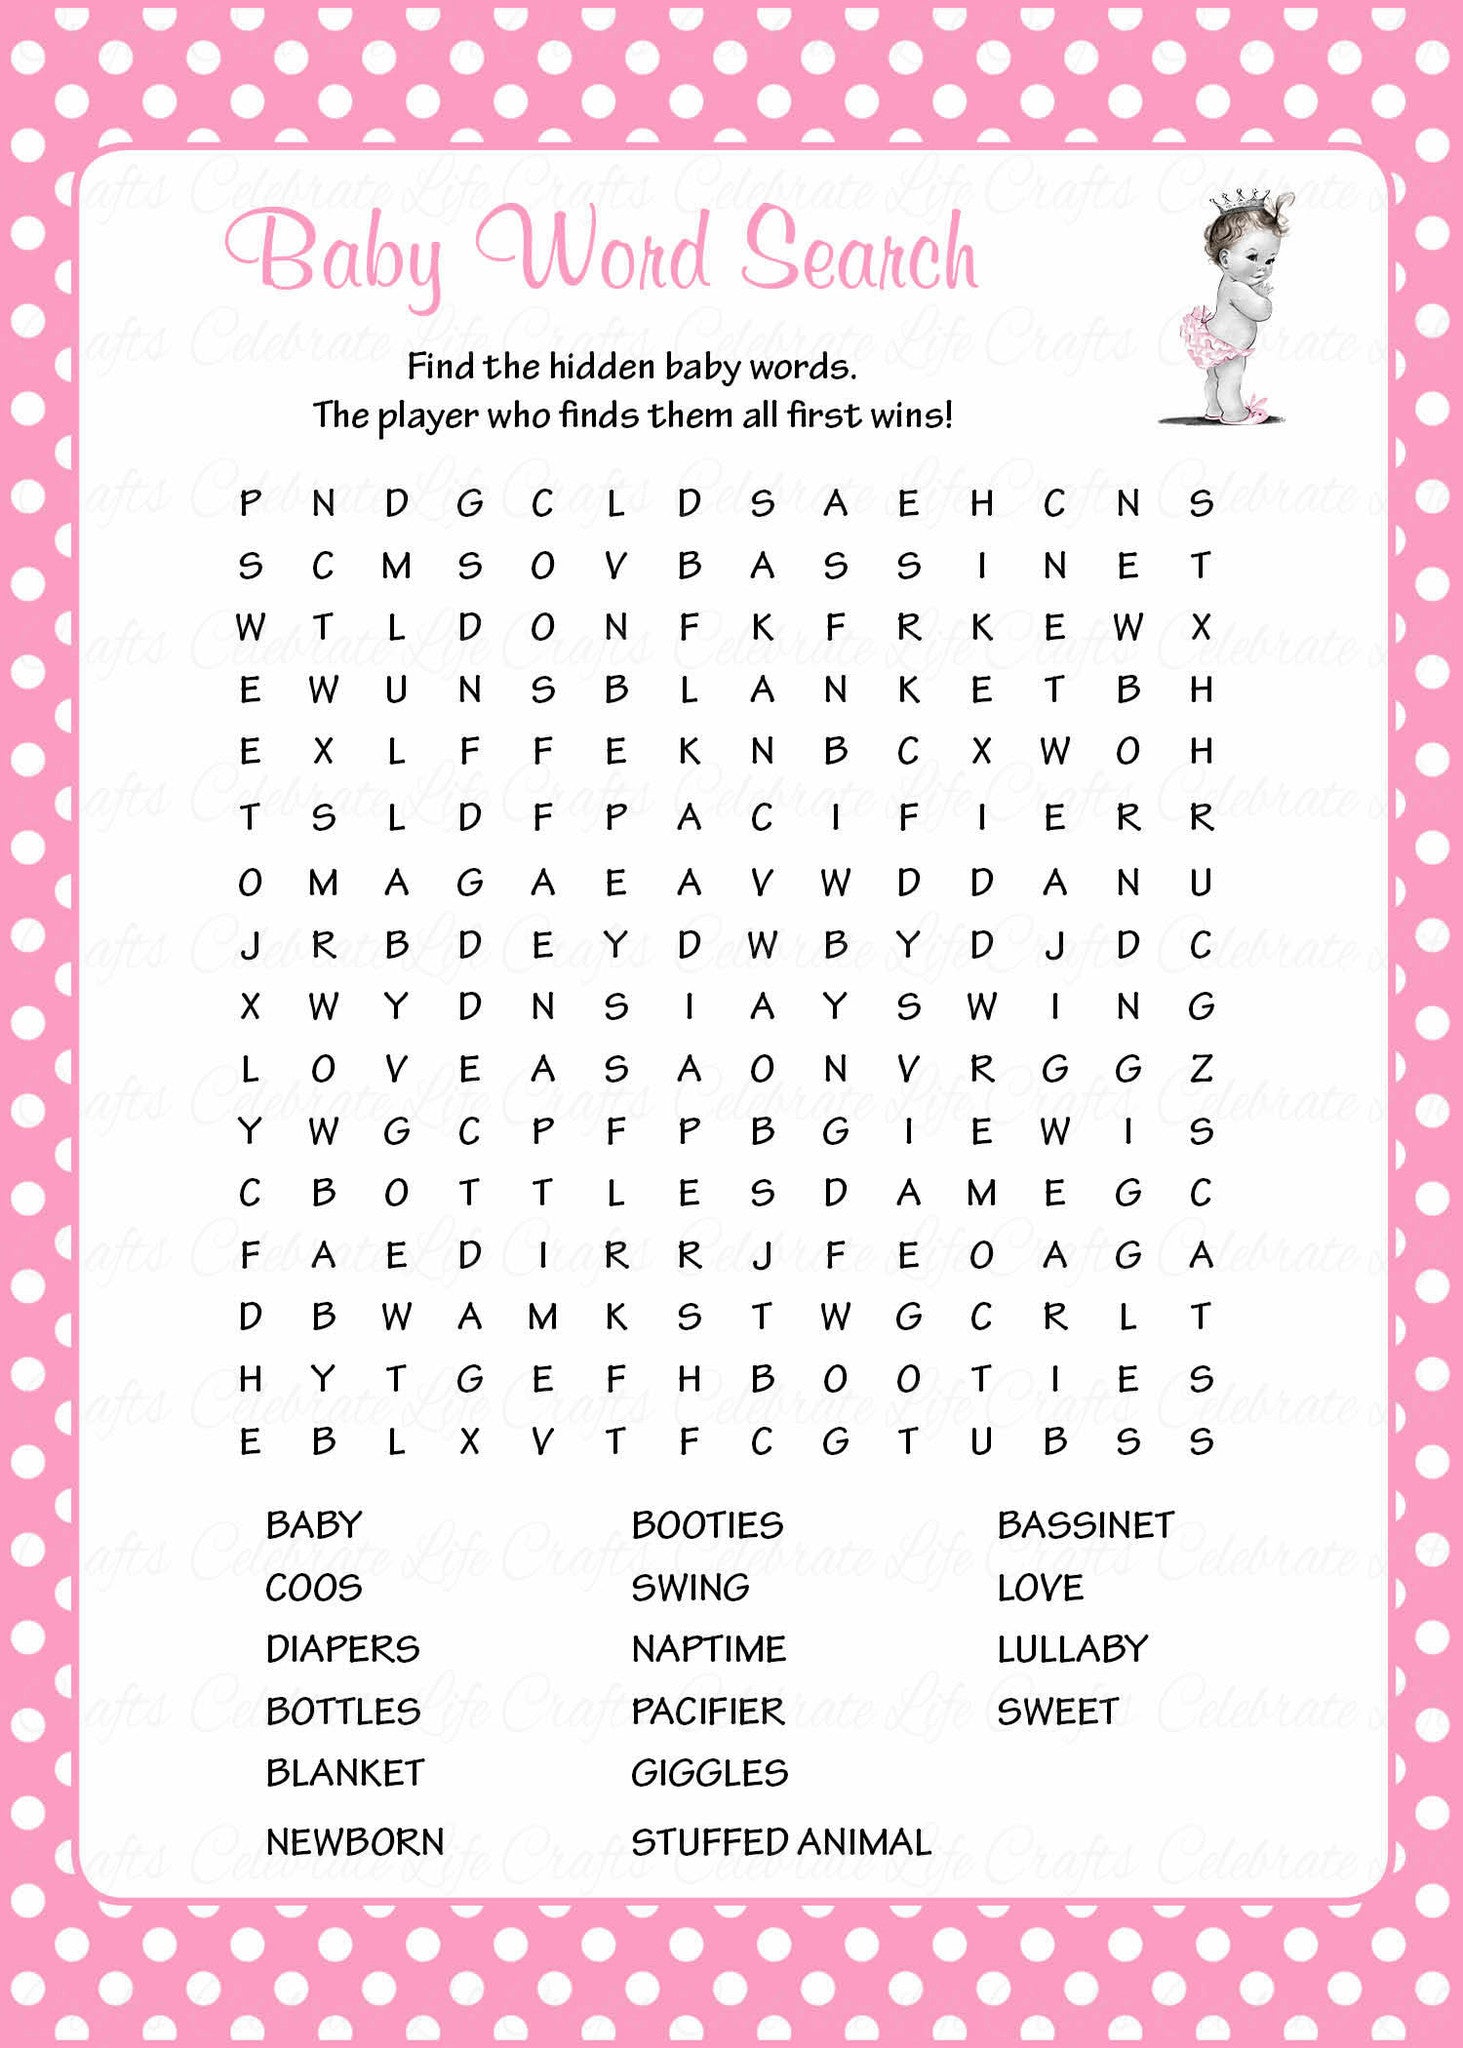 word-search-baby-shower-game-princess-baby-shower-theme-for-baby-girl